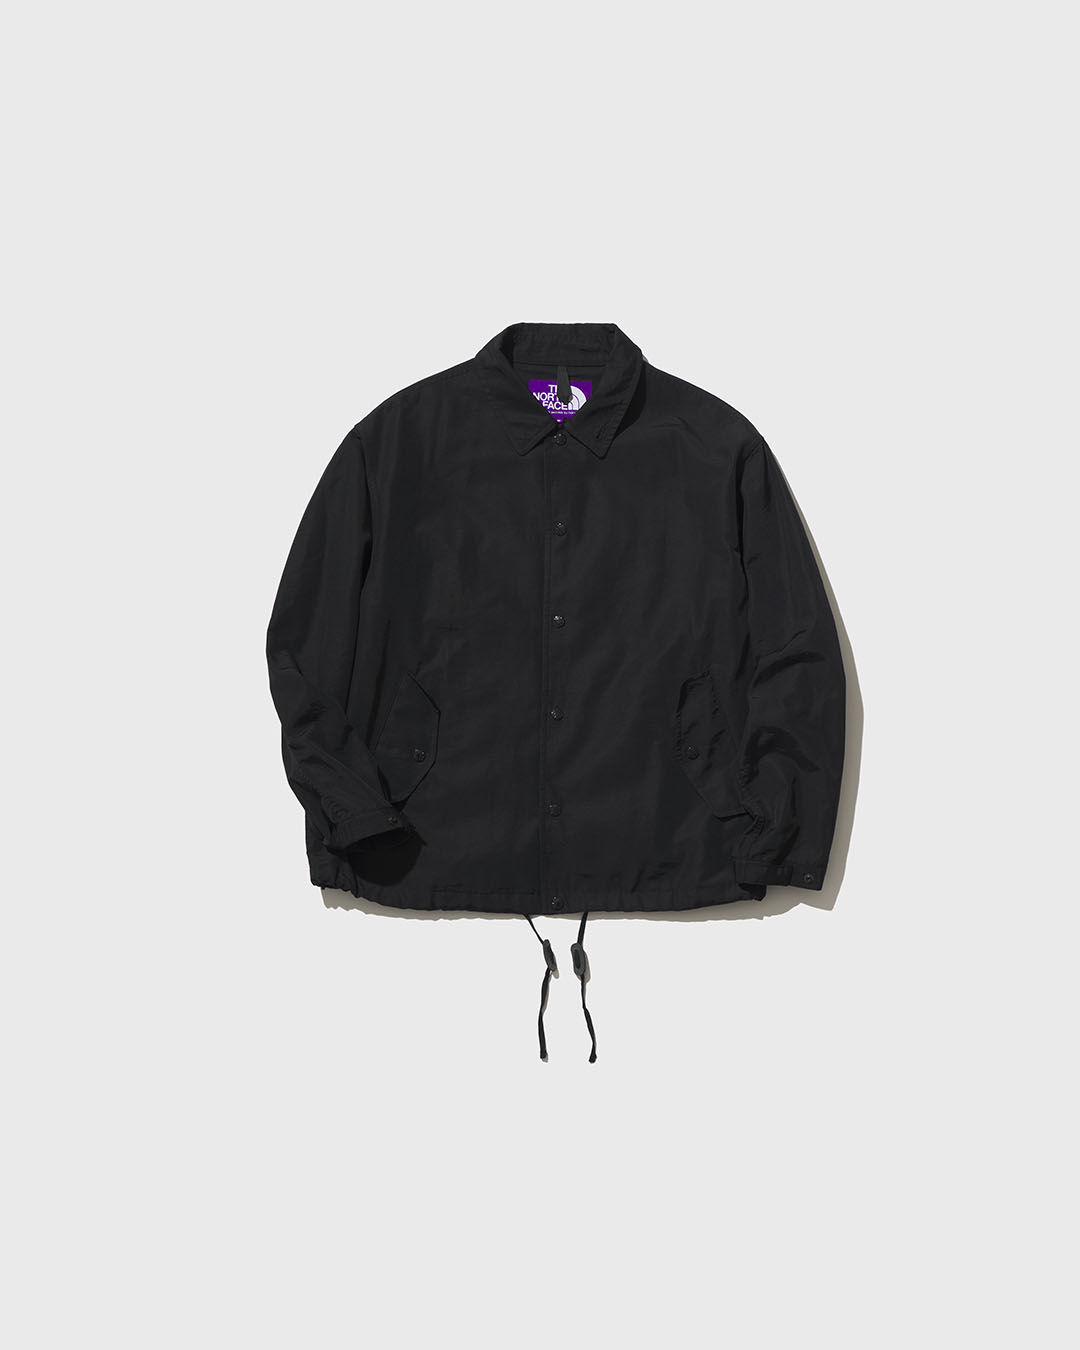 nanamica / THE NORTH FACE PURPLE LABEL / Featured Product vol.32